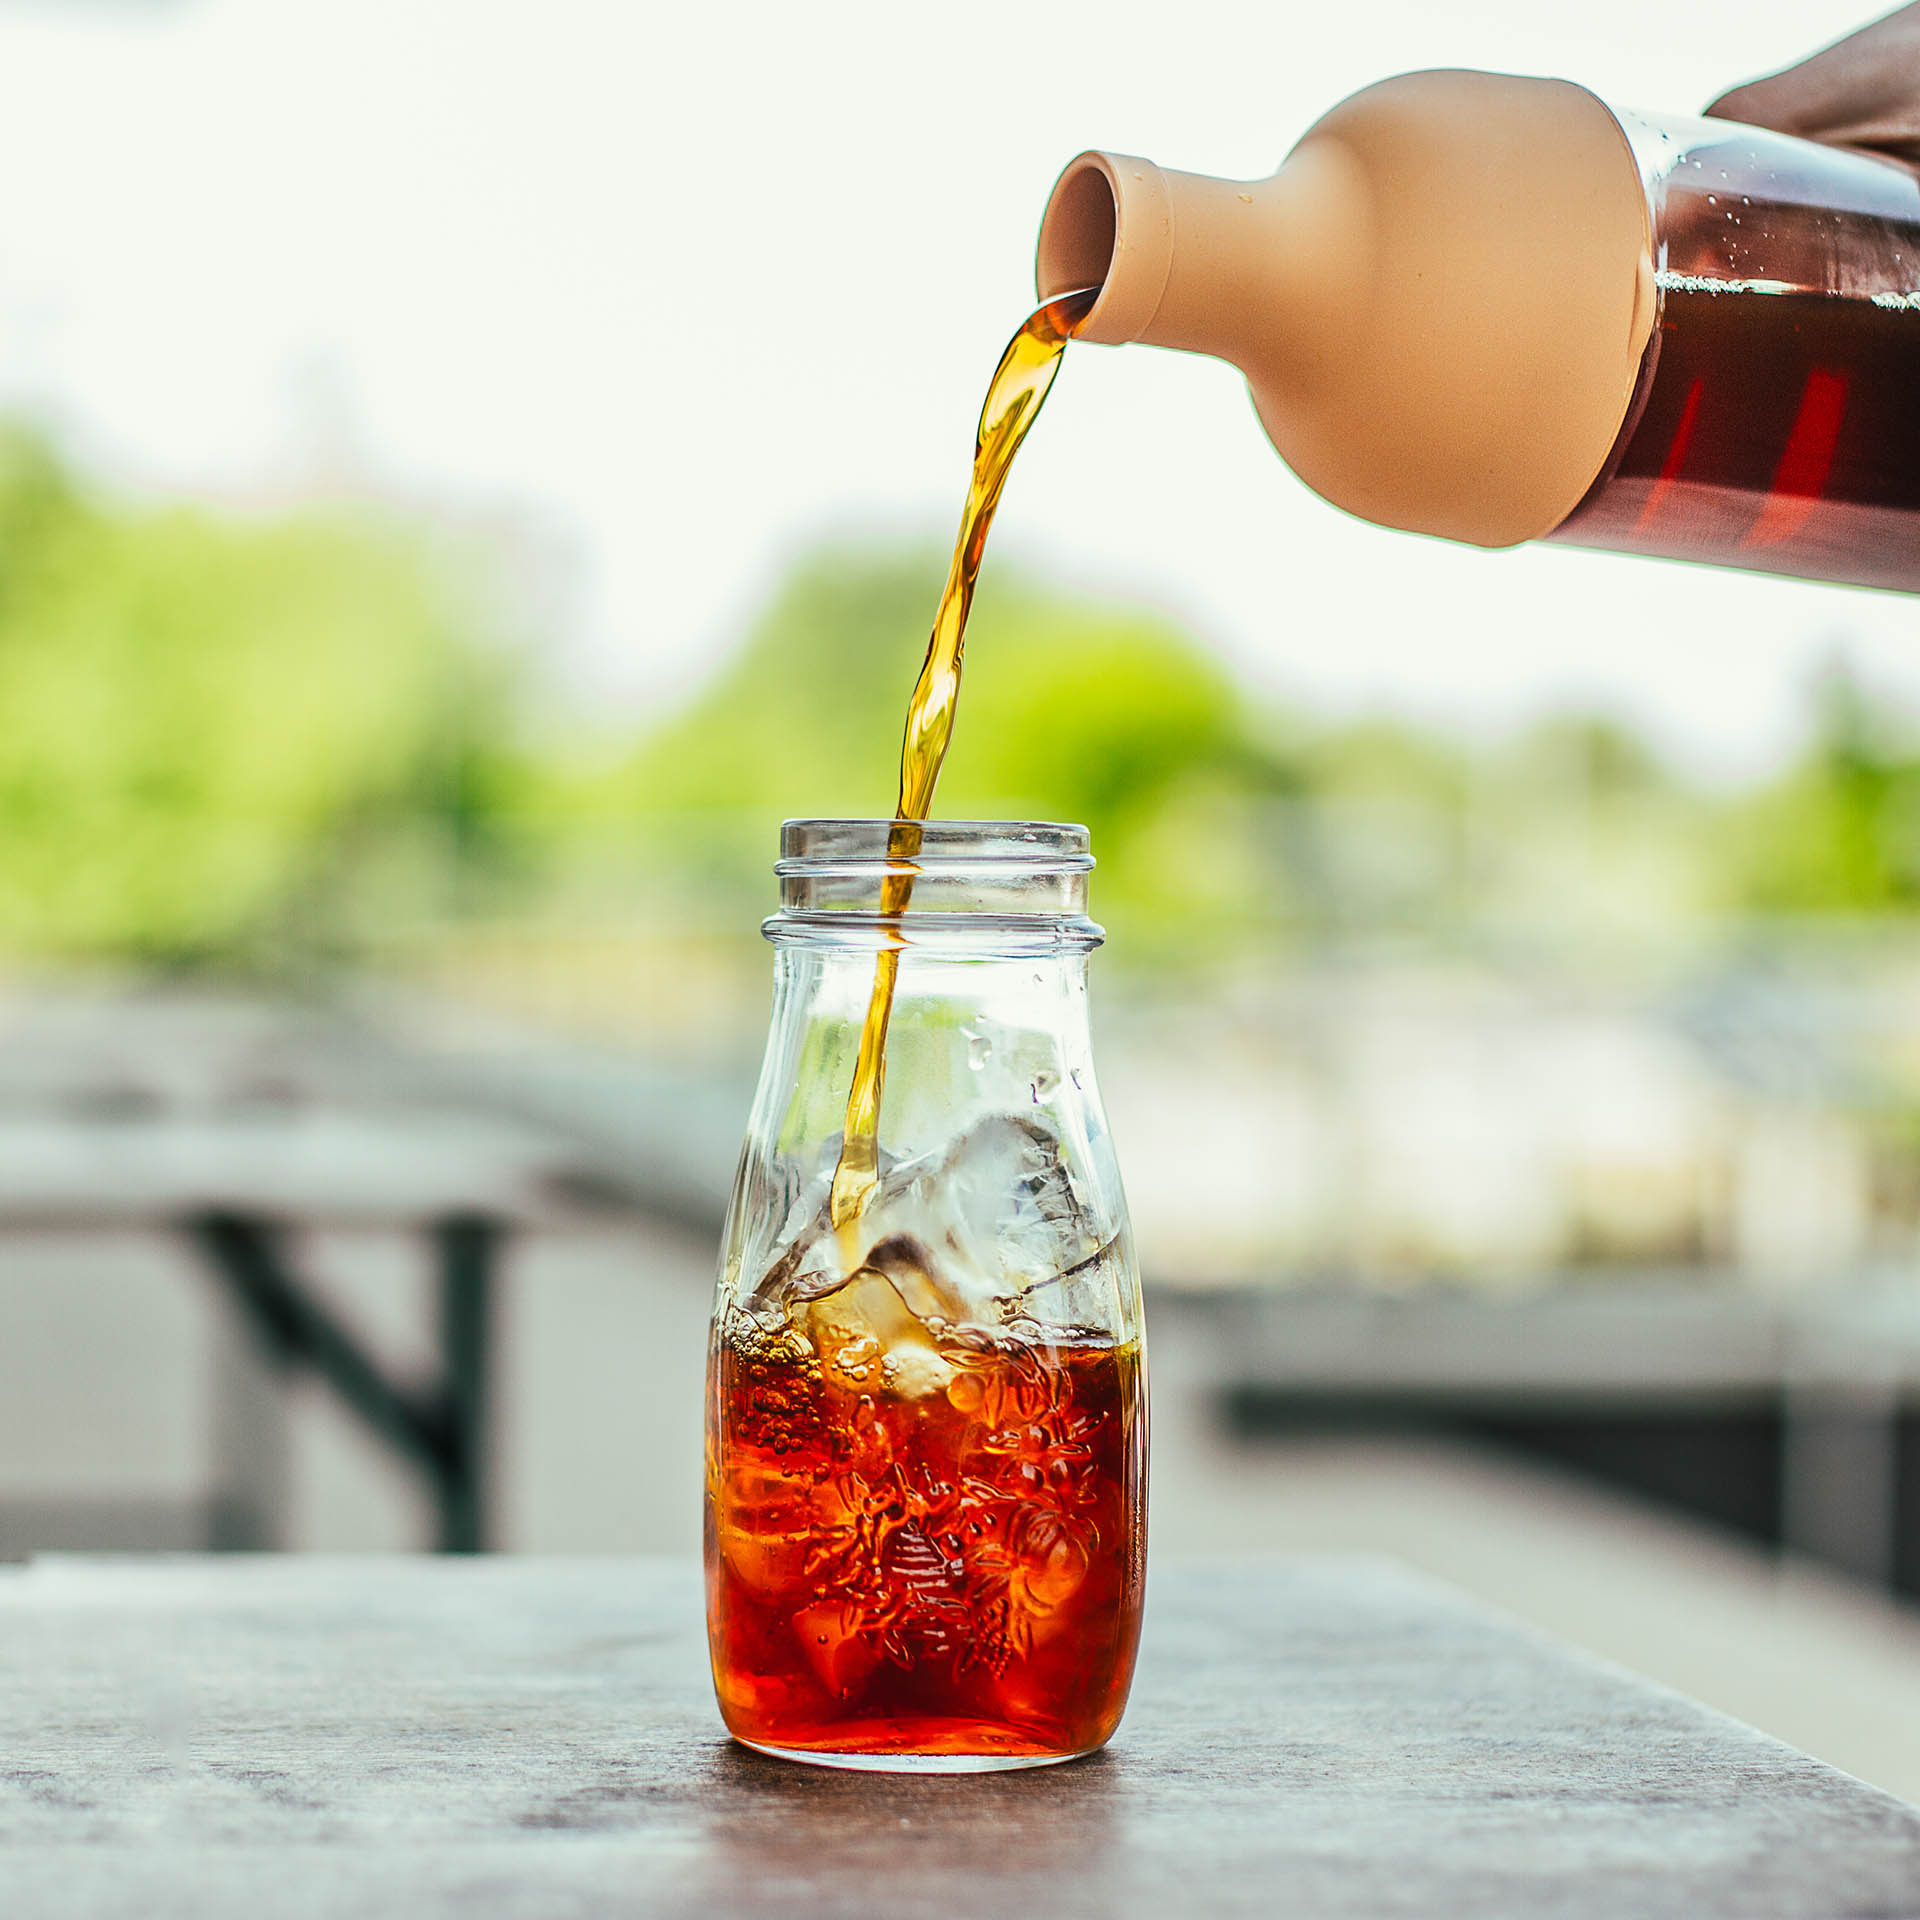 What Coffee for Cold Brew? - Blog Coffeedesk.pl